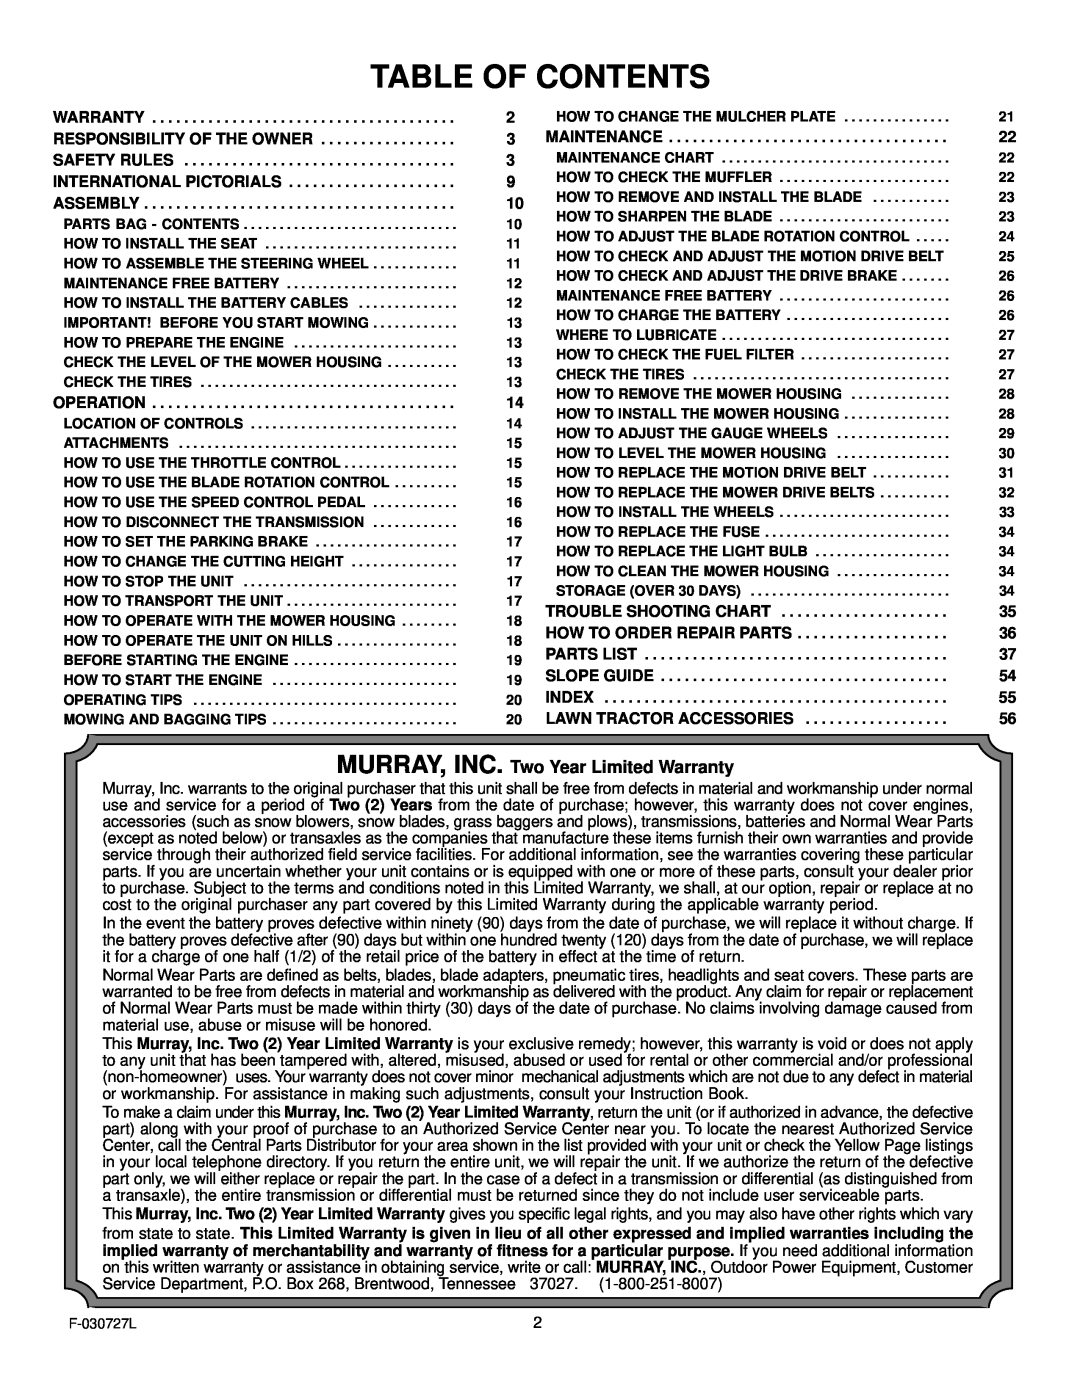 Murray 465600x8A manual Table Of Contents, MURRAY, INC. Two Year Limited Warranty 